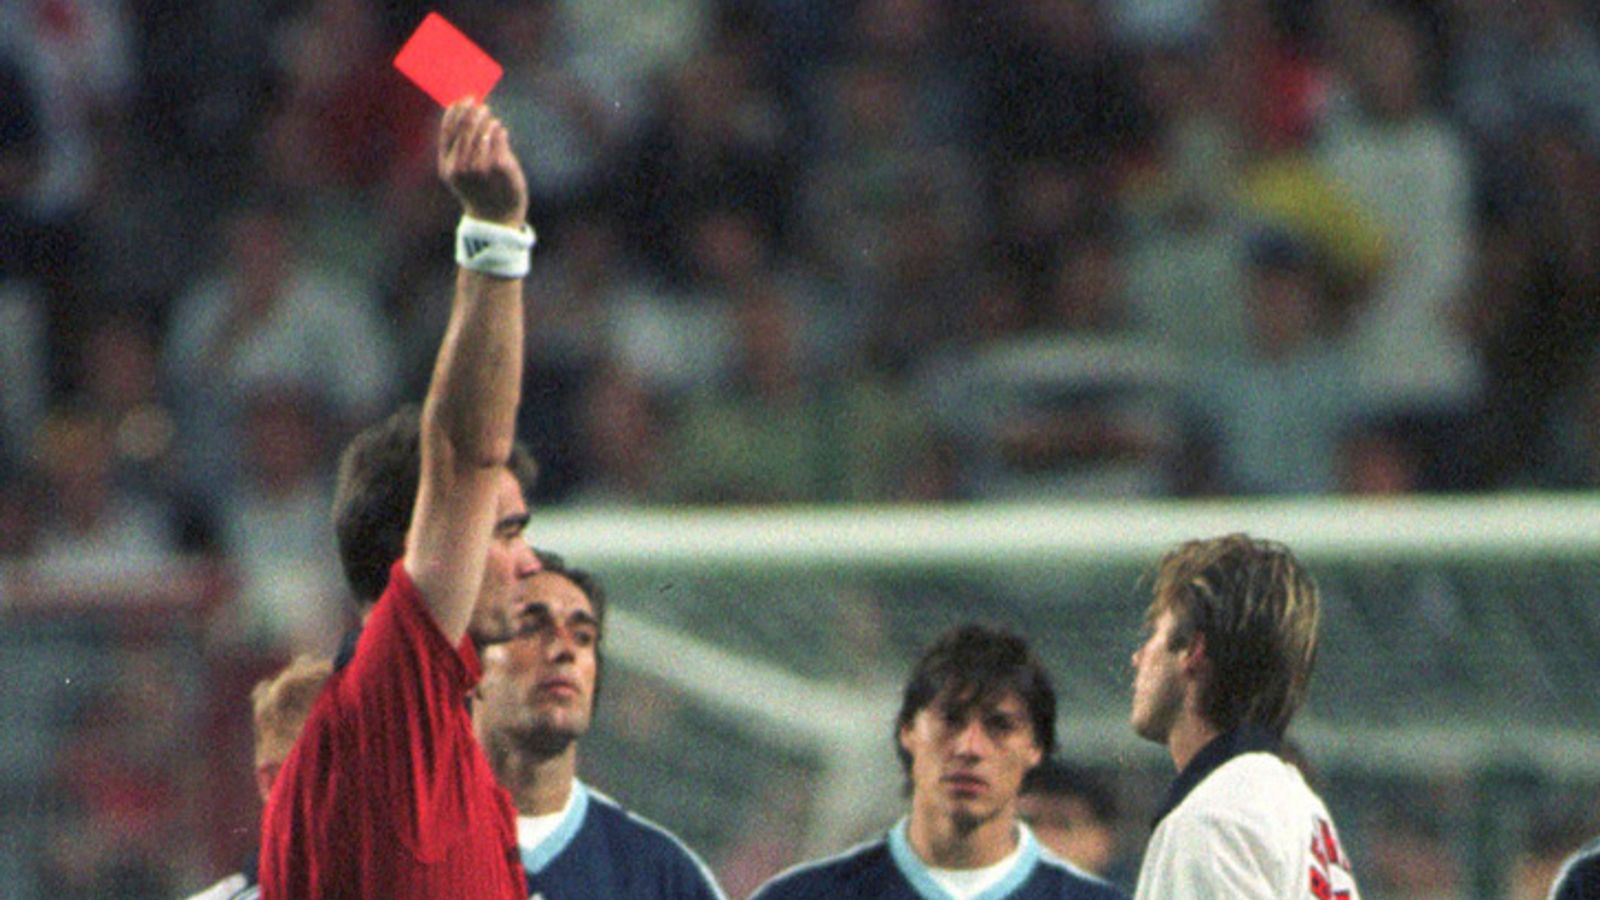 FILE - England's David Beckham receives a red card from Danish referee Kim Milton Nielsen for kicking Argentina's Diego Simeone, during England's World Cup second round soccer match against Argentina, in Saint Etienne, France on June 30, 1998. England lost on penalties after the match ended 2-2. A four-part Netflix series, "Beckham," explores Beckham’s upbringing and his triumphs on the field, but perhaps the most difficult part was revisiting his painful sending off during England’s World Cup m